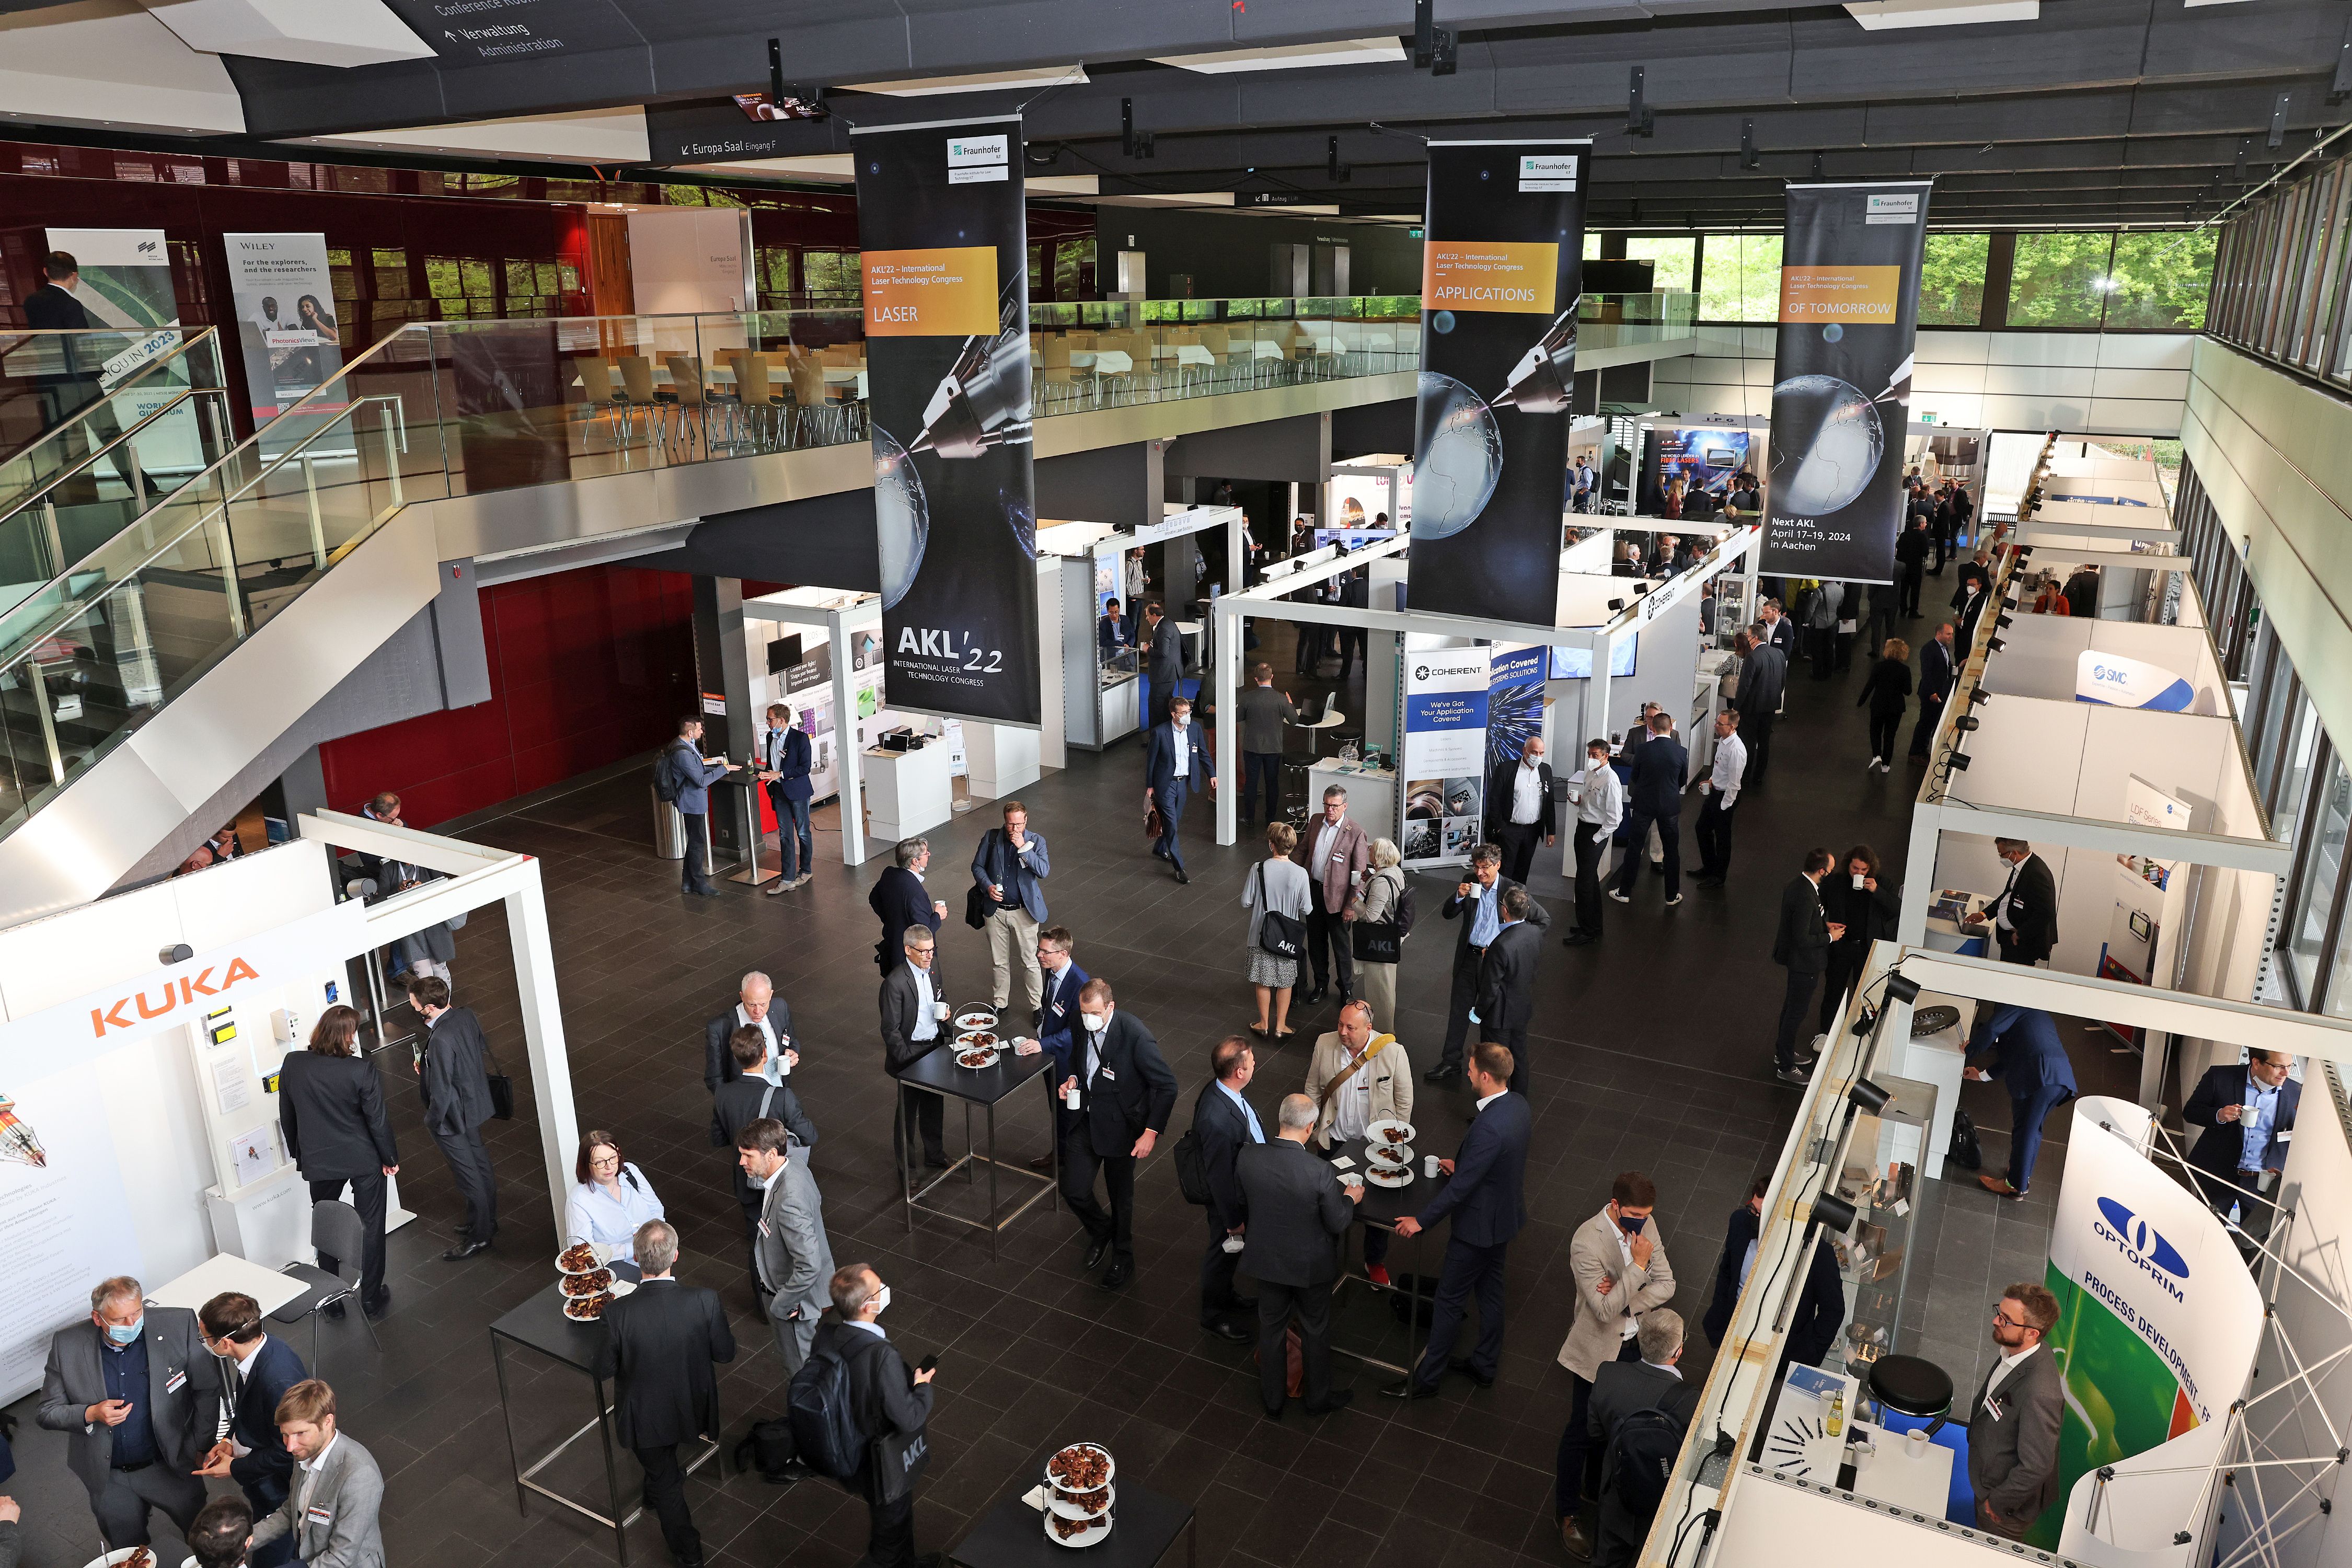 In addition to the presentations, the participants of AKL'24 in Aachen will once again have plenty of opportunities for networking. In the picture: accompanying exhibition of AKL'22.